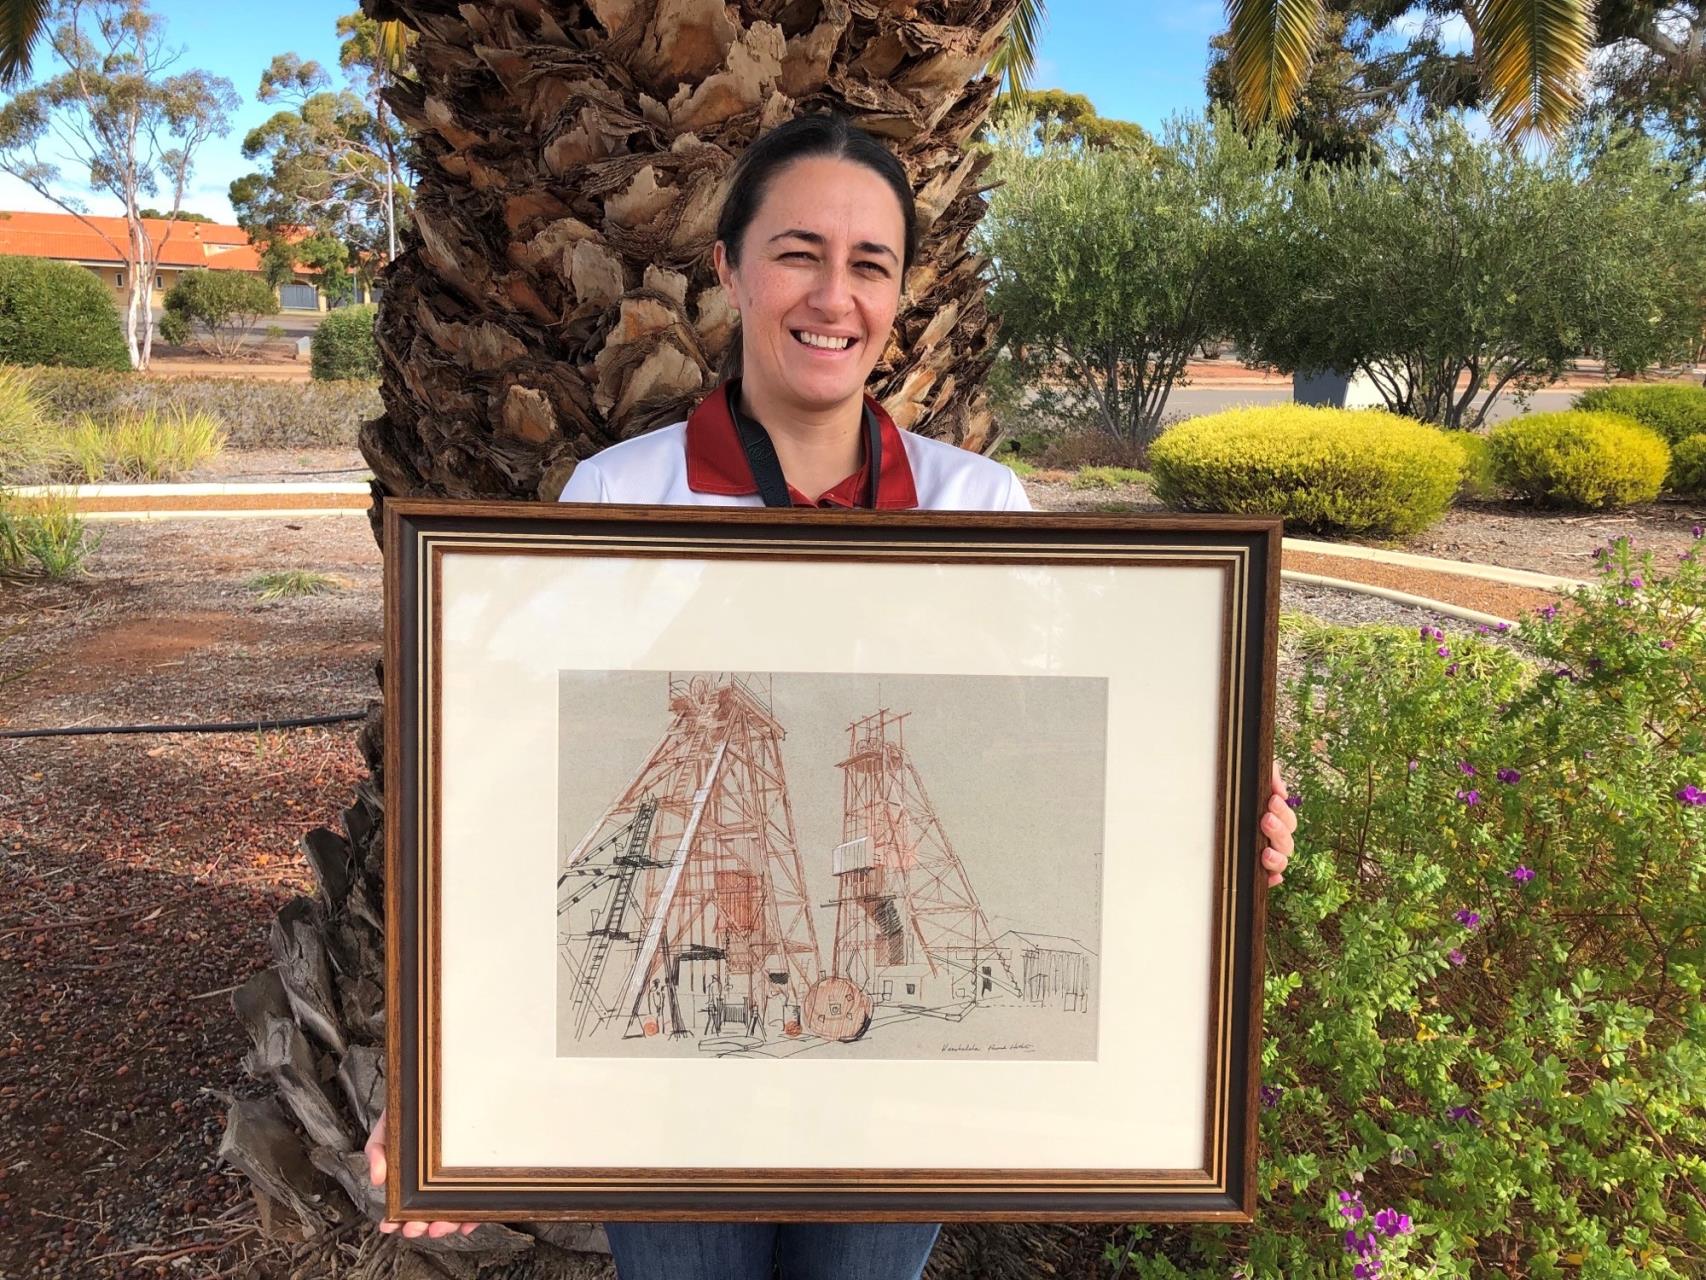 Shire of Coolgardie receives historical mining art piece